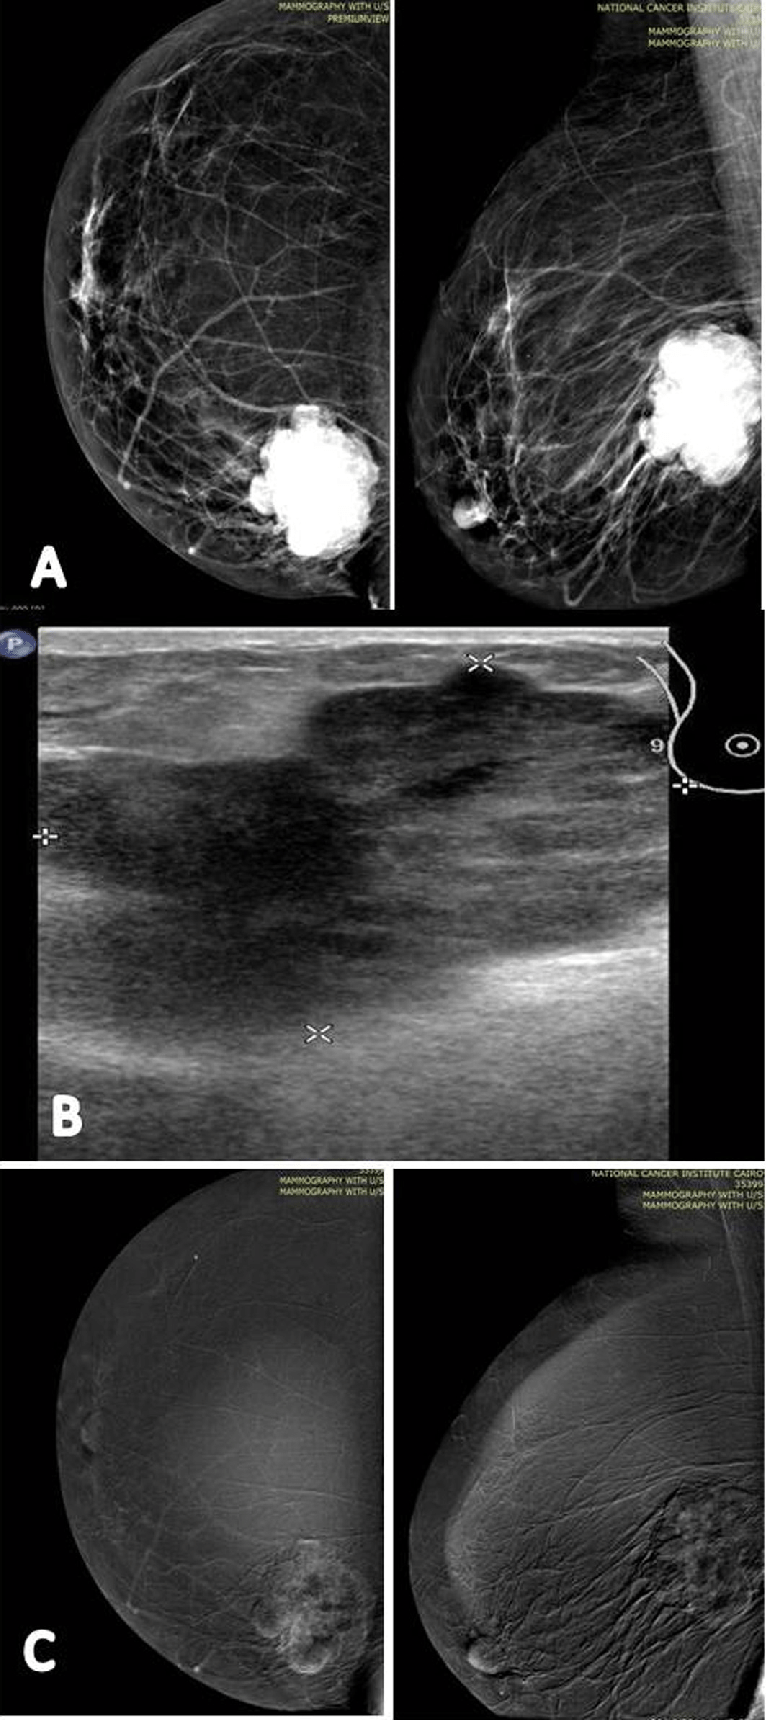 A 60-year-old patient presented by a lump in the left breast.